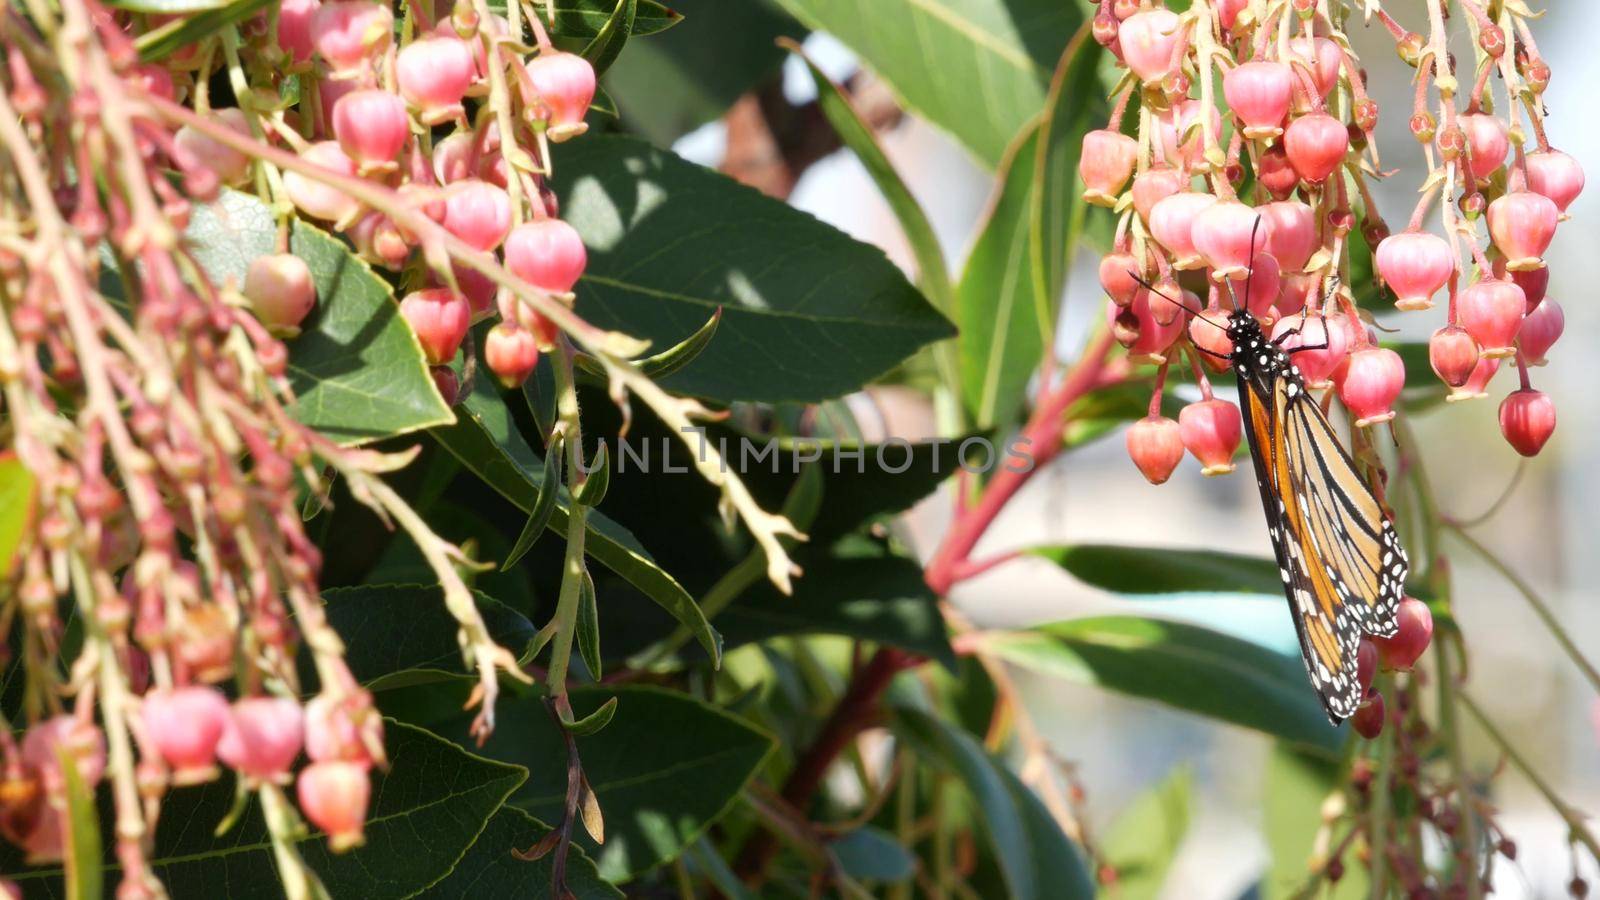 Monarch butterfly pollinate arbutus flower, California USA. Pink madrone blossom, romantic botanical atmosphere, delicate exotic bloom. Spring pastel colors. Springtime morning freshness in garden.